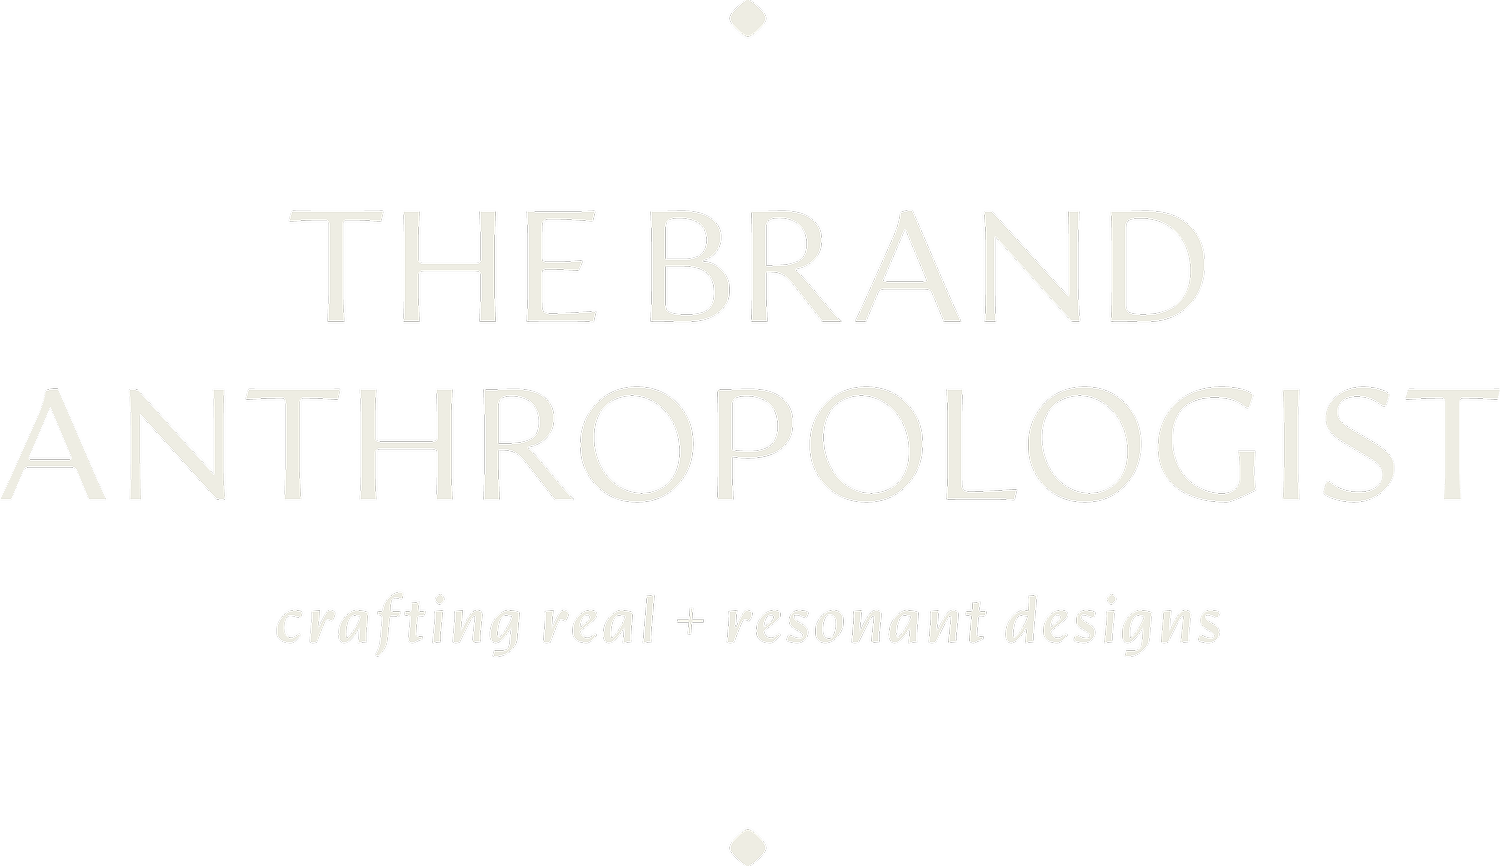 The Brand Anthropologist